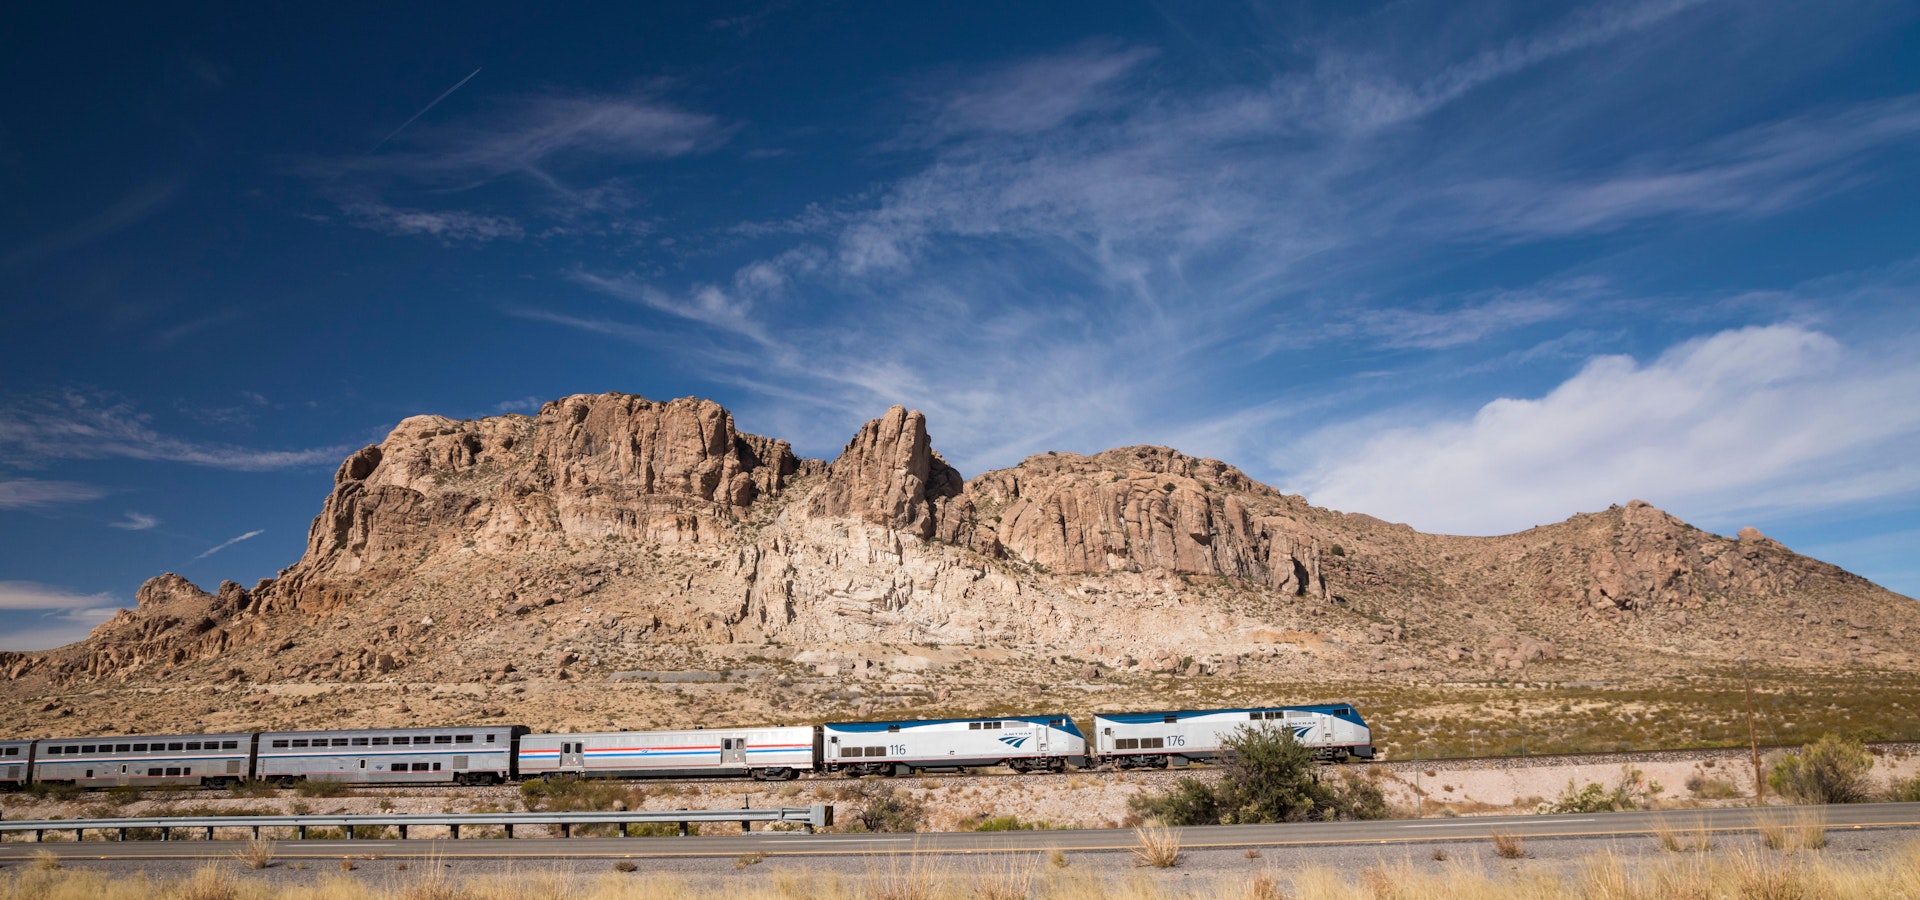 Steins, New Mexico - The Amtrak Texas Eagle, eastbound from Los Angeles to Chicago, in western New Mexico.